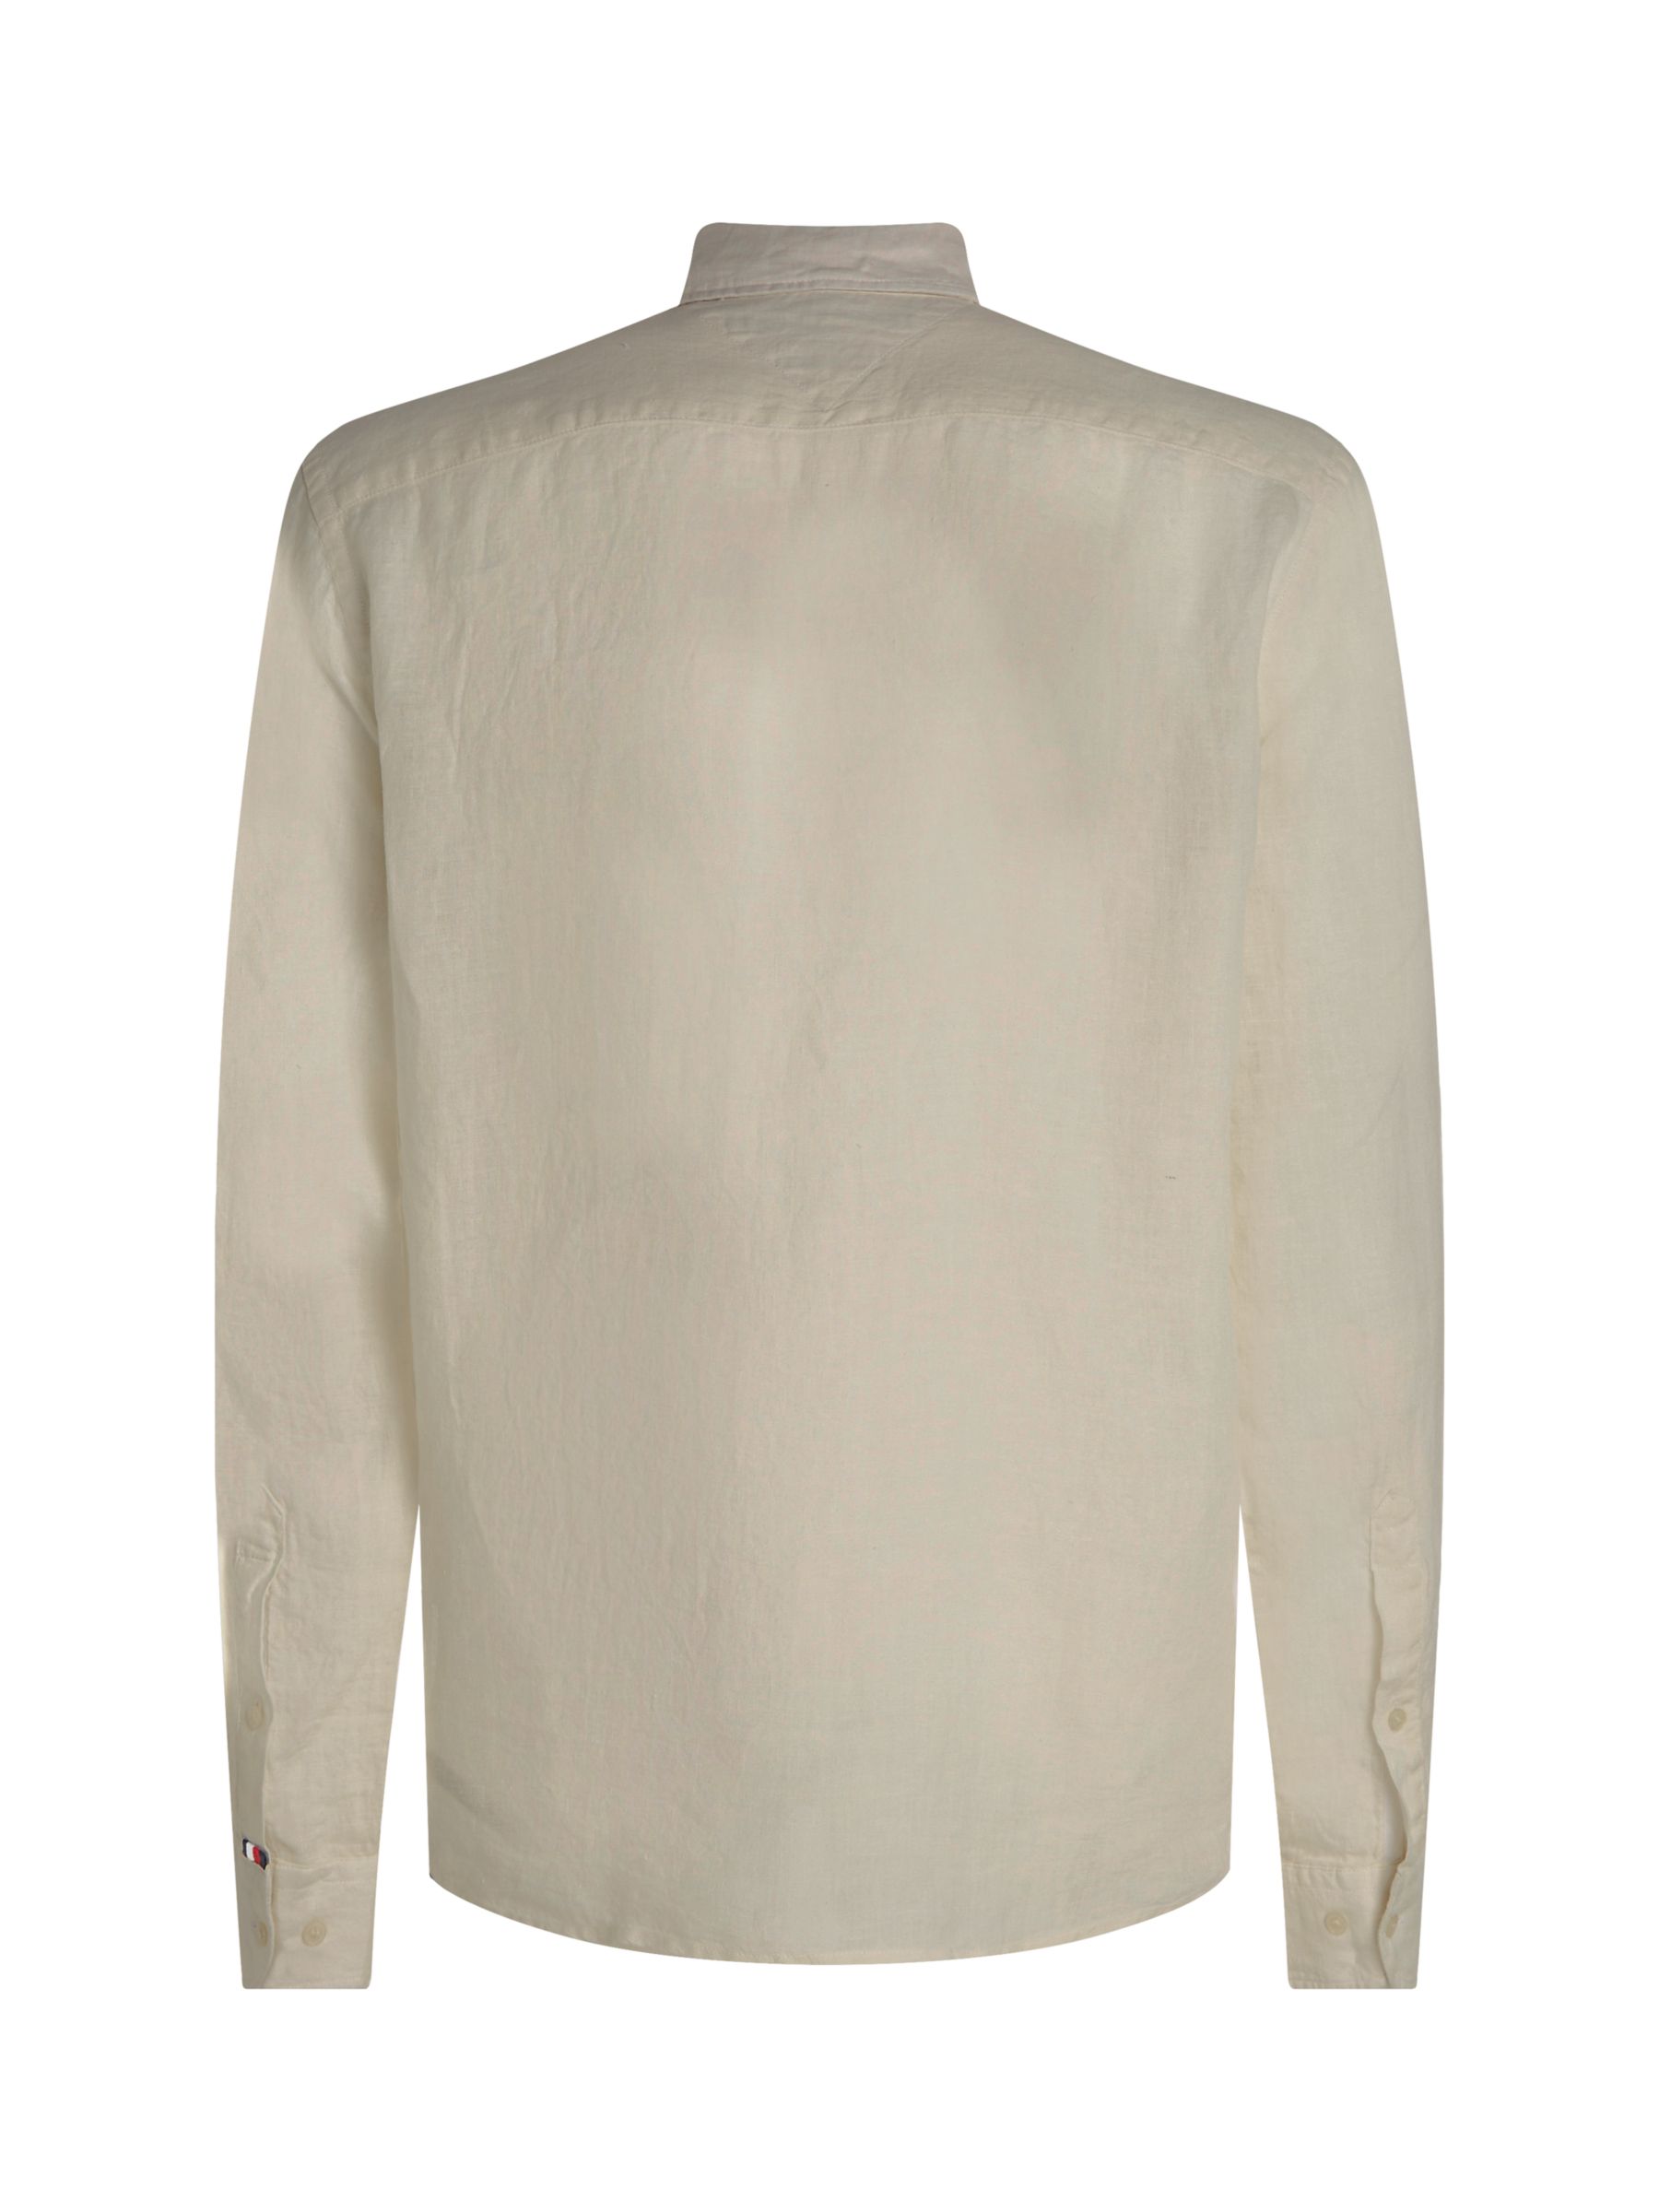 Tommy Hilfiger Pigment Dyed Long Sleeve Shirt, Stone at John Lewis ...